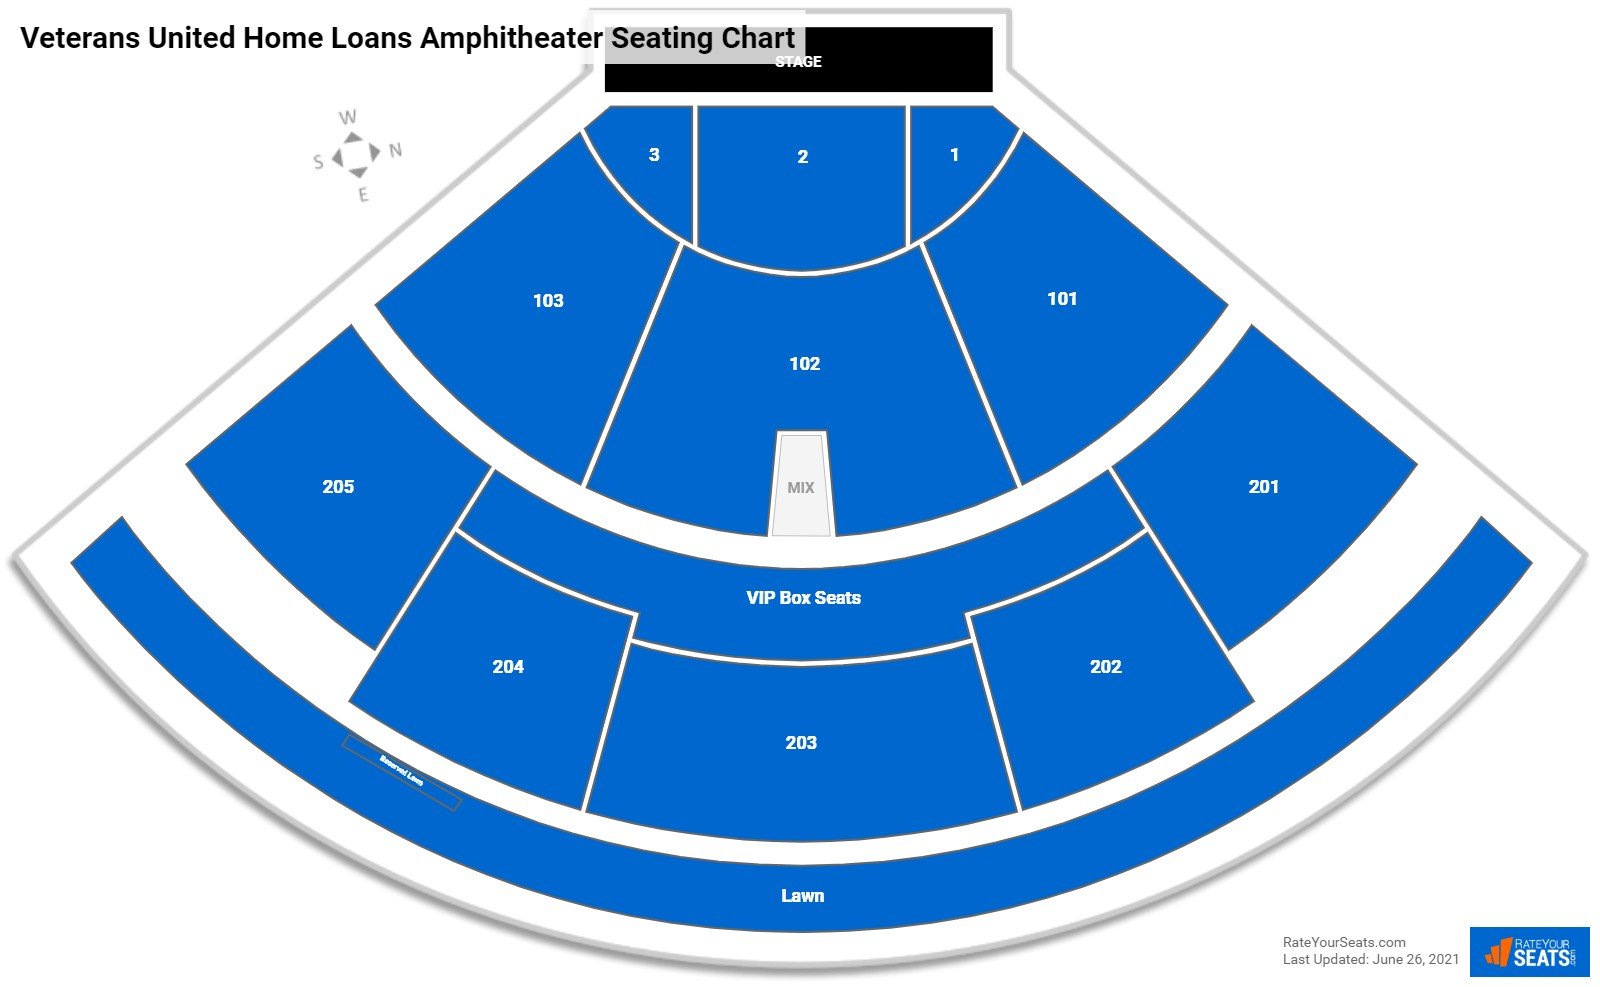 Veterans United Home Loans Amphitheater Concert Seating Chart